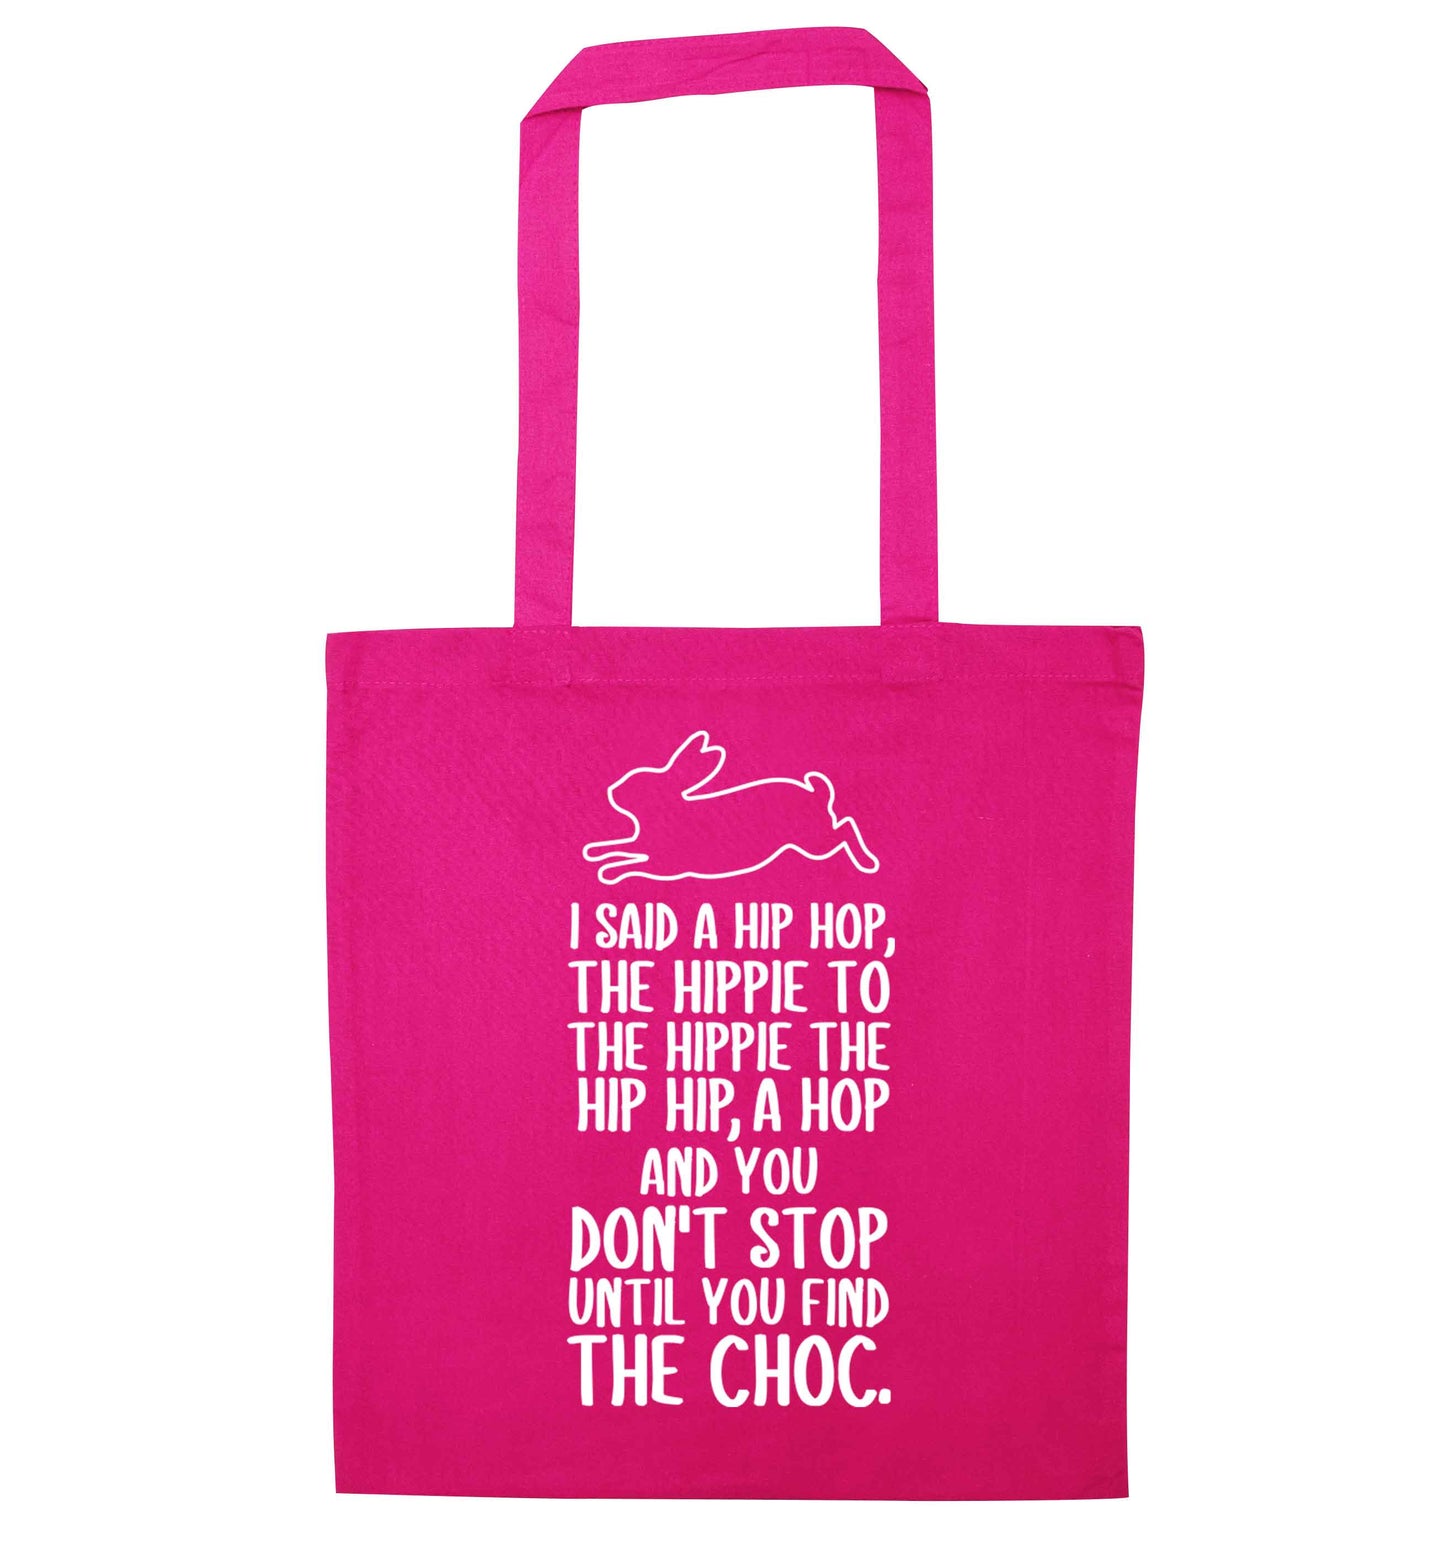 Don't stop until you find the choc pink tote bag